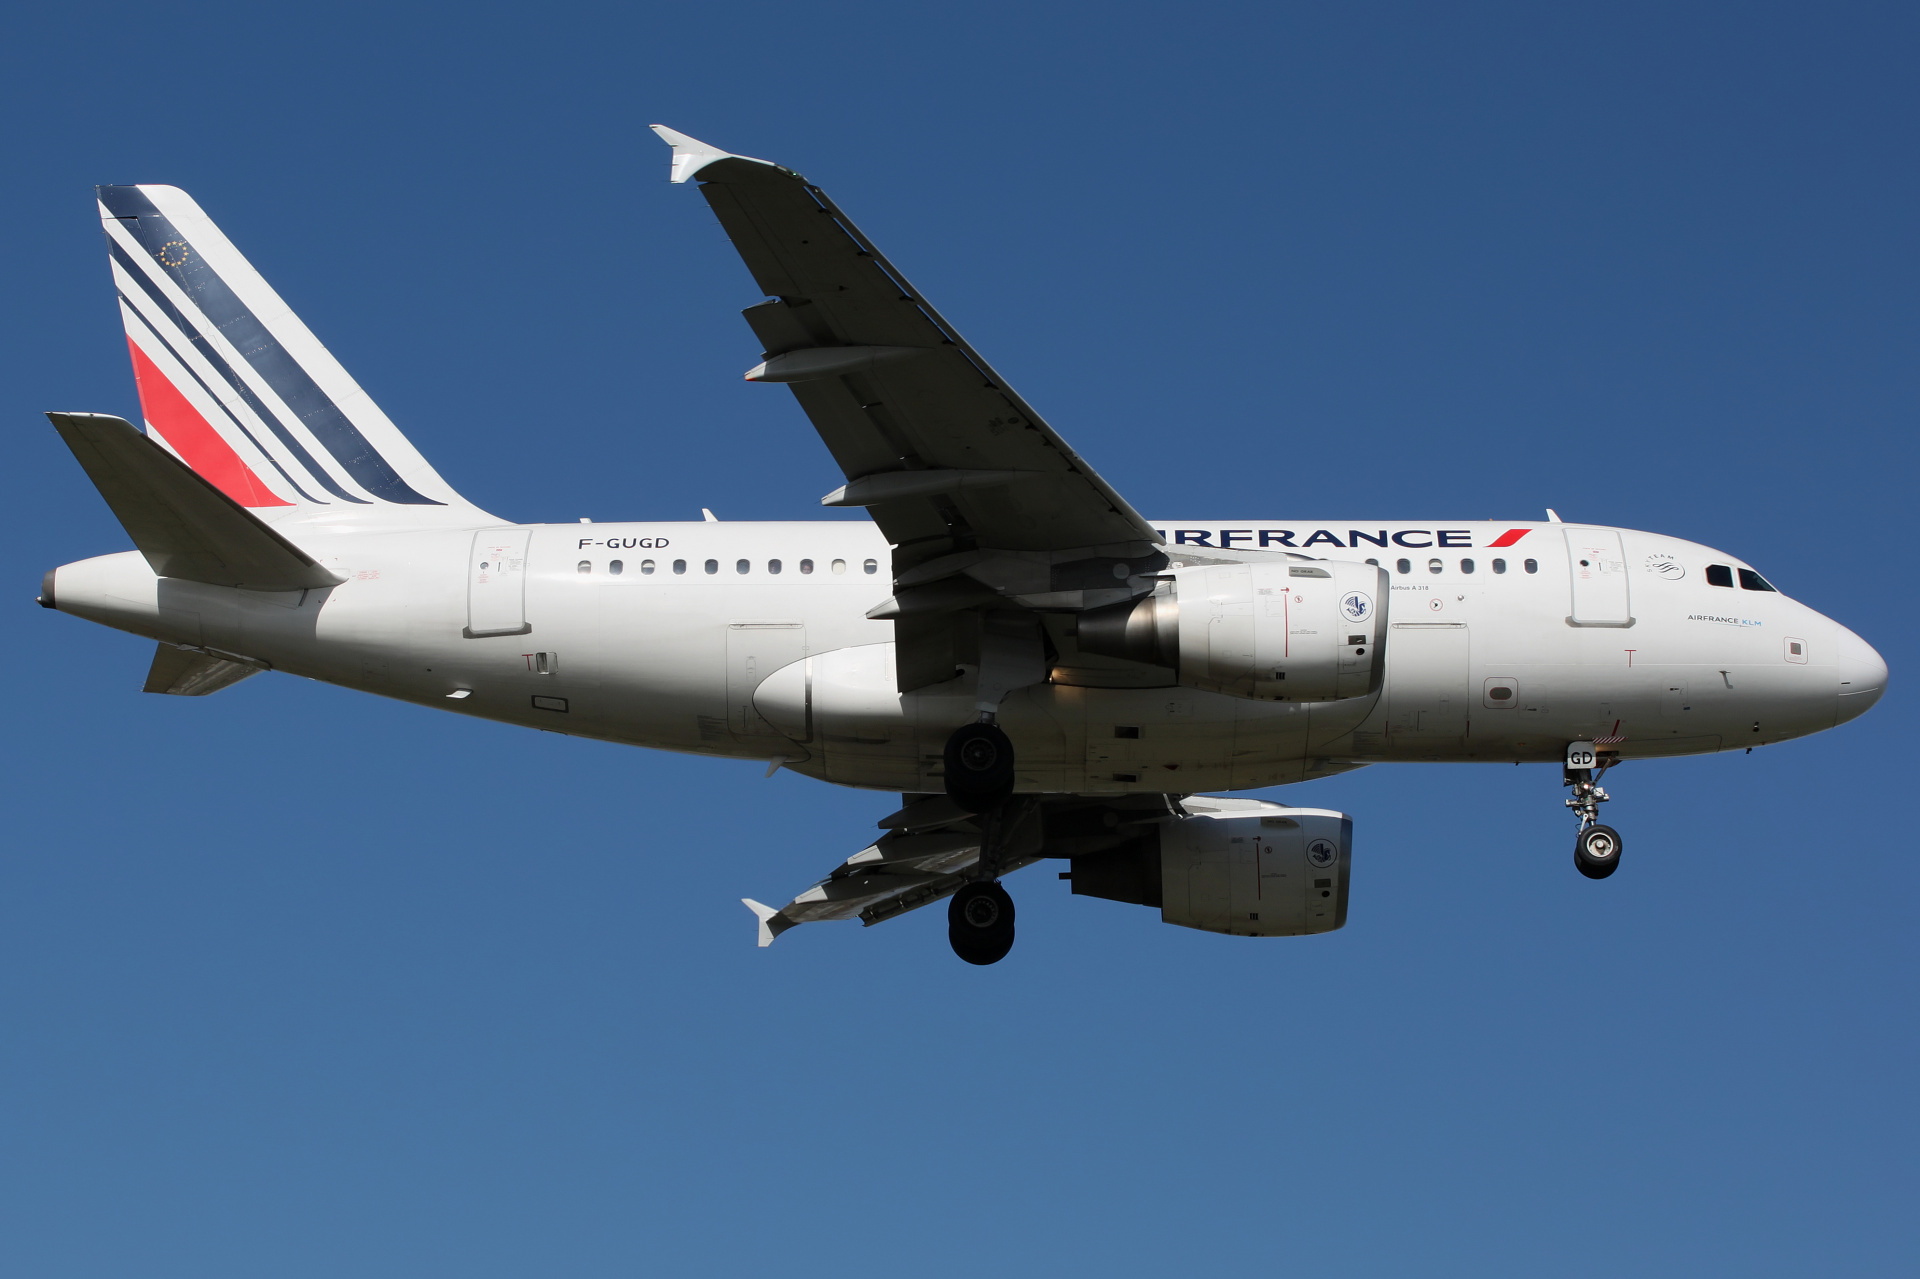 F-GUGD (new livery) (Aircraft » EPWA Spotting » Airbus A318-100 » Air France)